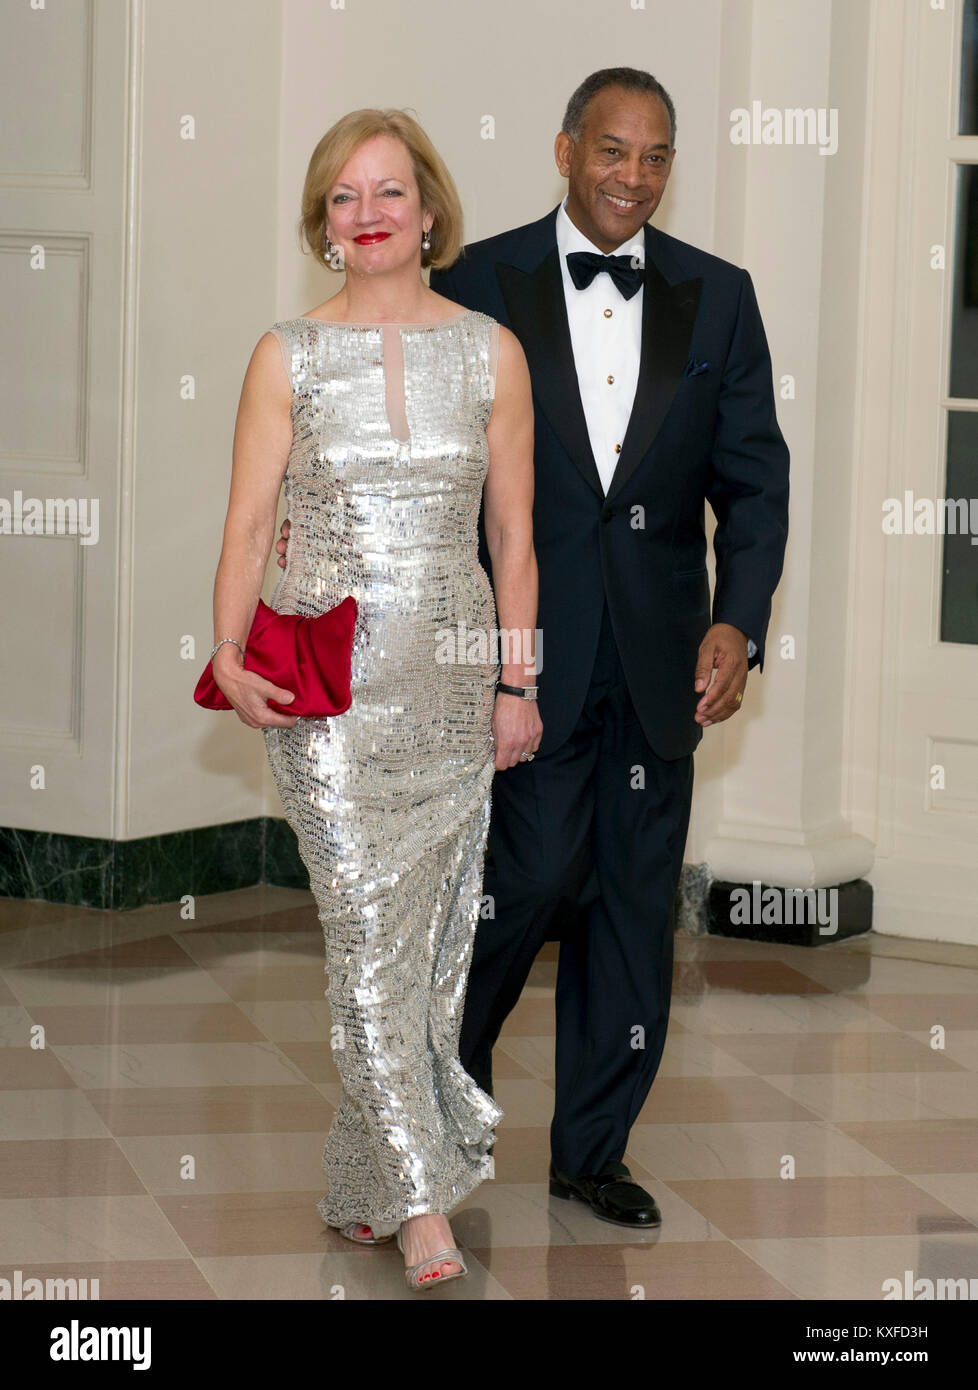 John W. Thompson, CEO of Virtual Instruments, and Sandi Thompson arrive for the Official Dinner in honor of Prime Minister David Cameron of Great Britain and his wife, Samantha, at the White House in Washington, D.C. on Tuesday, March 14, 2012. The Thompsons are two of United States President Barack Obama's biggest campaign fundraisers..Credit: Ron Sachs / CNP./ MediaPunch (RESTRICTION: NO New York or New Jersey Newspapers or newspapers within a 75 mile radius of New York City) Stock Photo